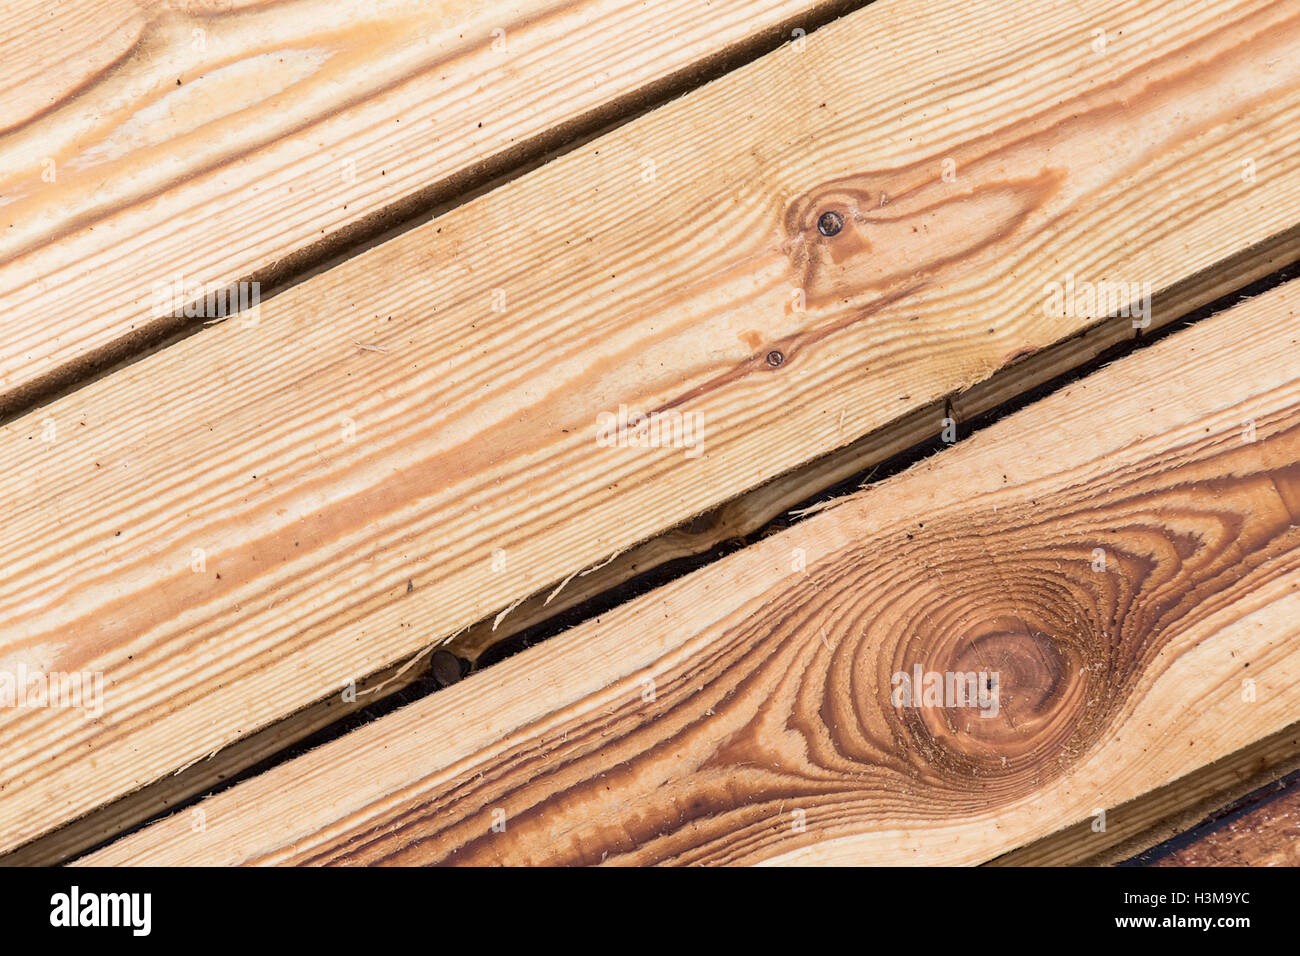 sprayed liquid from the fire on the wooden boards of the roof construction Stock Photo